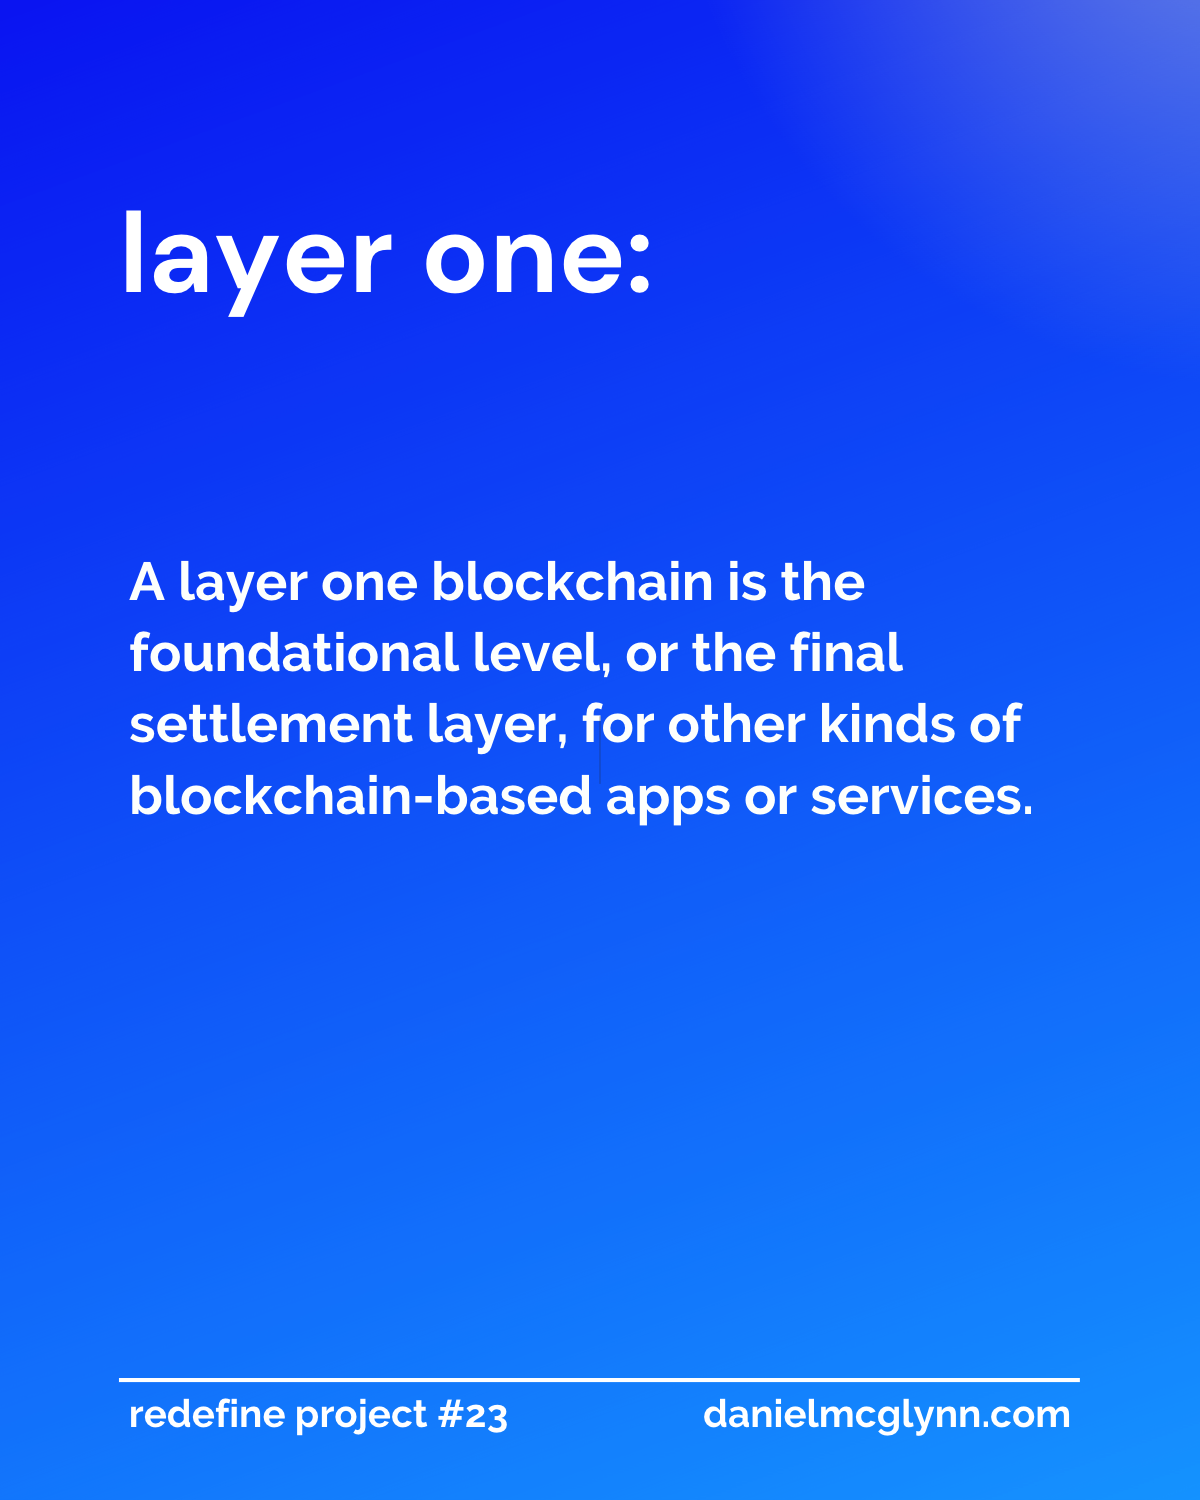 A layer one blockchain is the foundation, or the final settlement layer, for other kinds of blockchain-based apps or services.